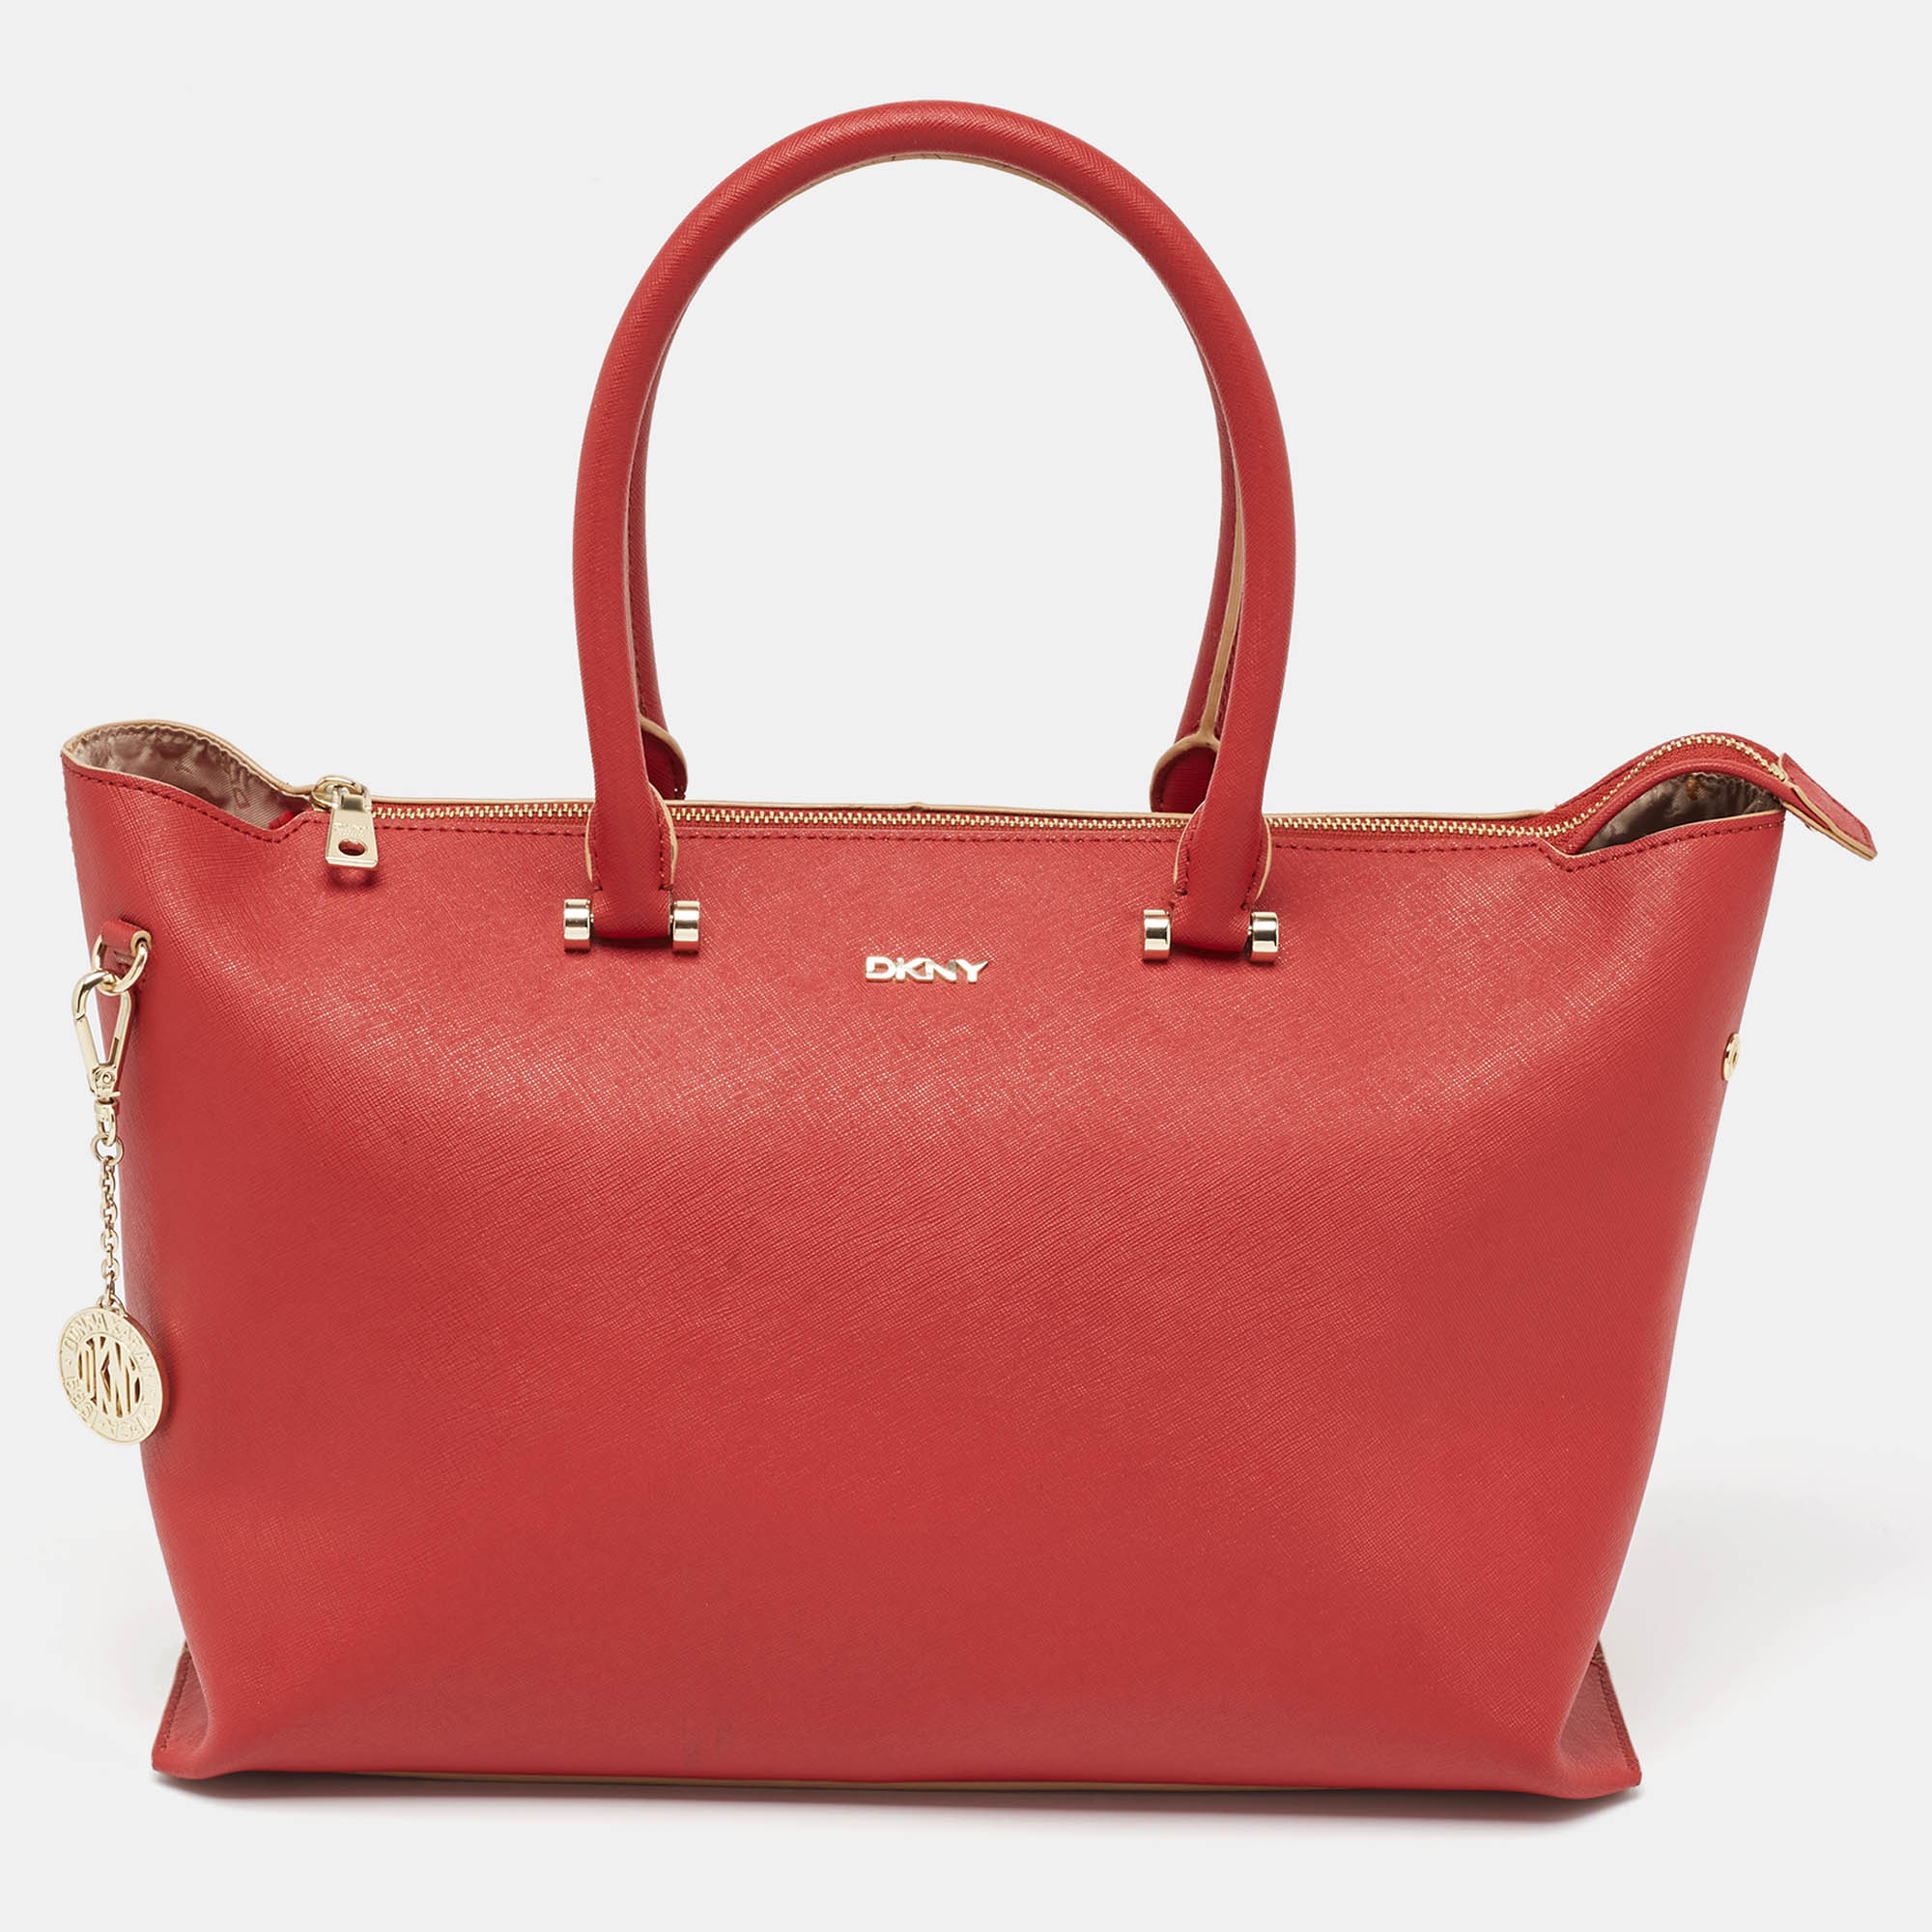 Dkny red leather bryant park top zip tote